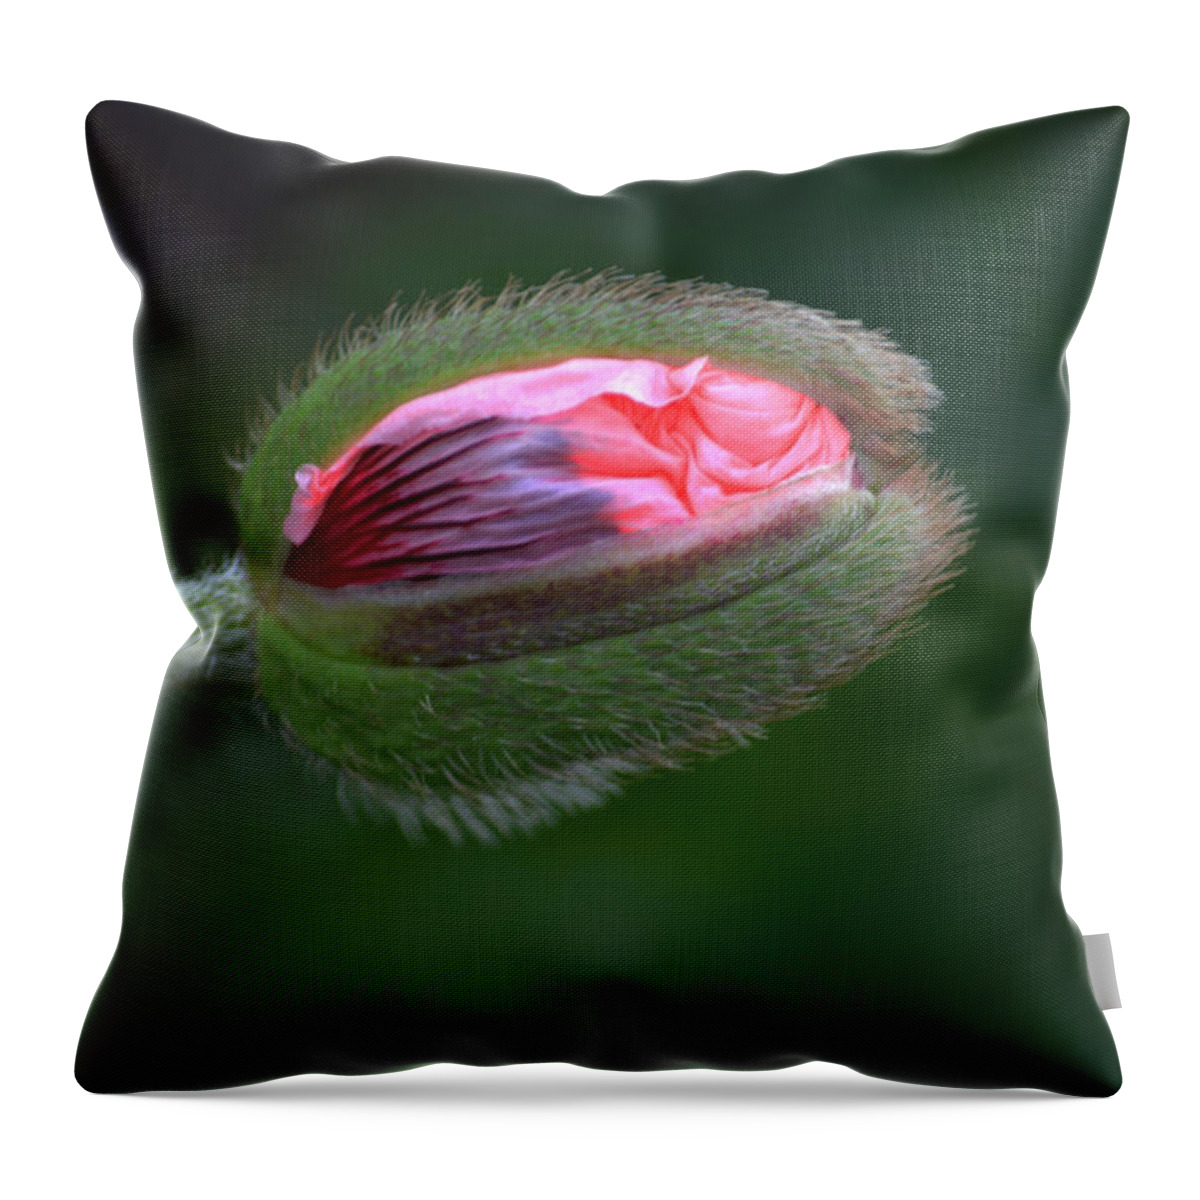 Poppy Throw Pillow featuring the photograph Popping Poppy. by Terence Davis